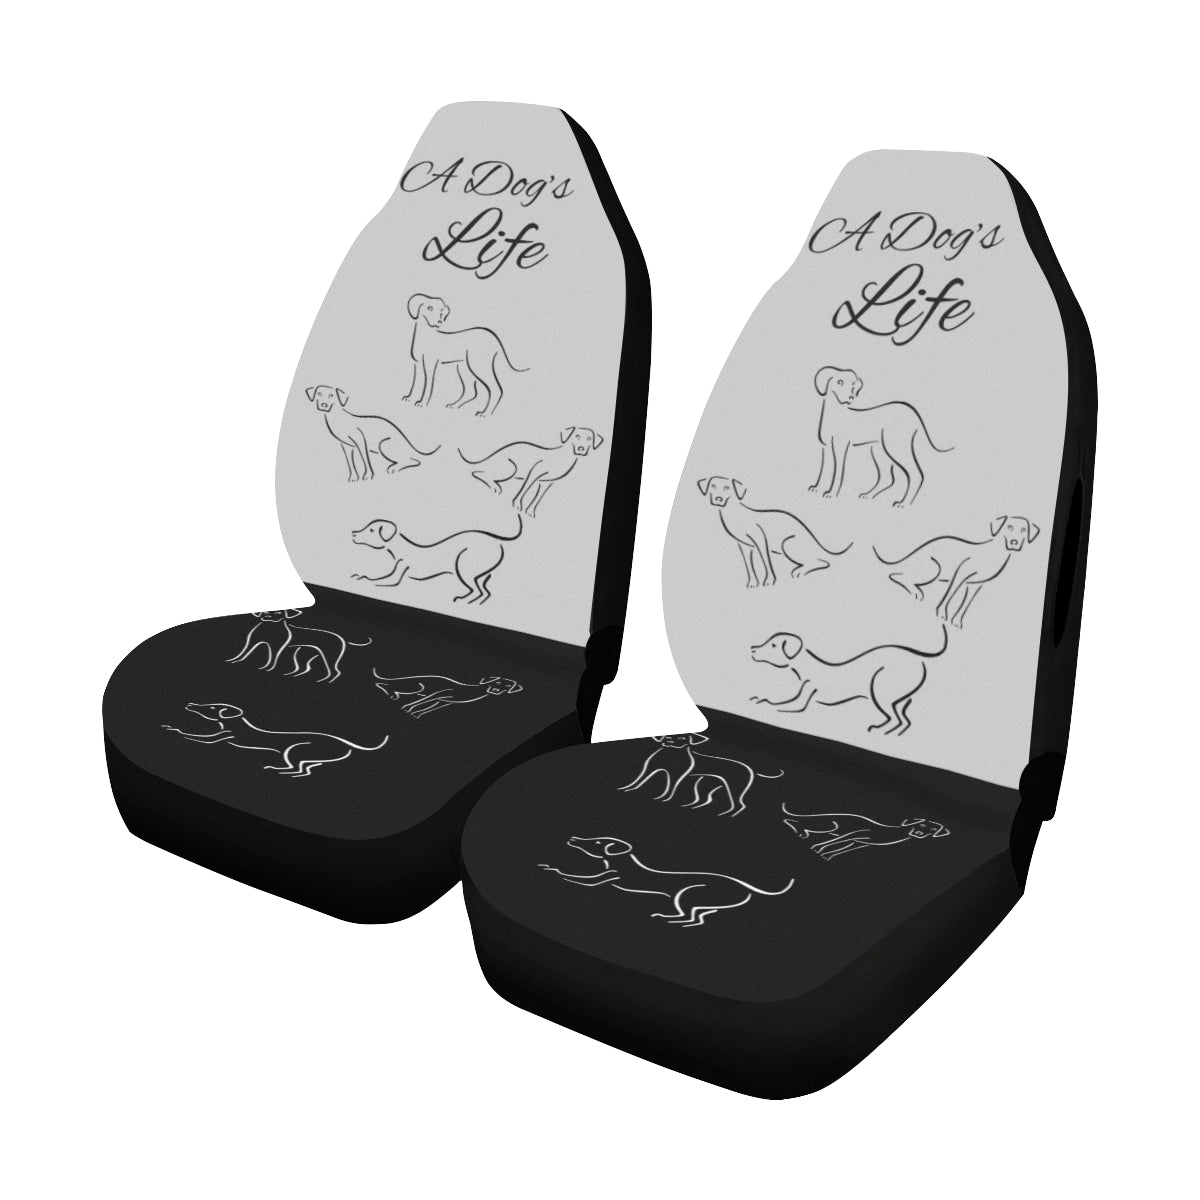 A Dog's Life Car Seat Covers (Set of 2) - 2